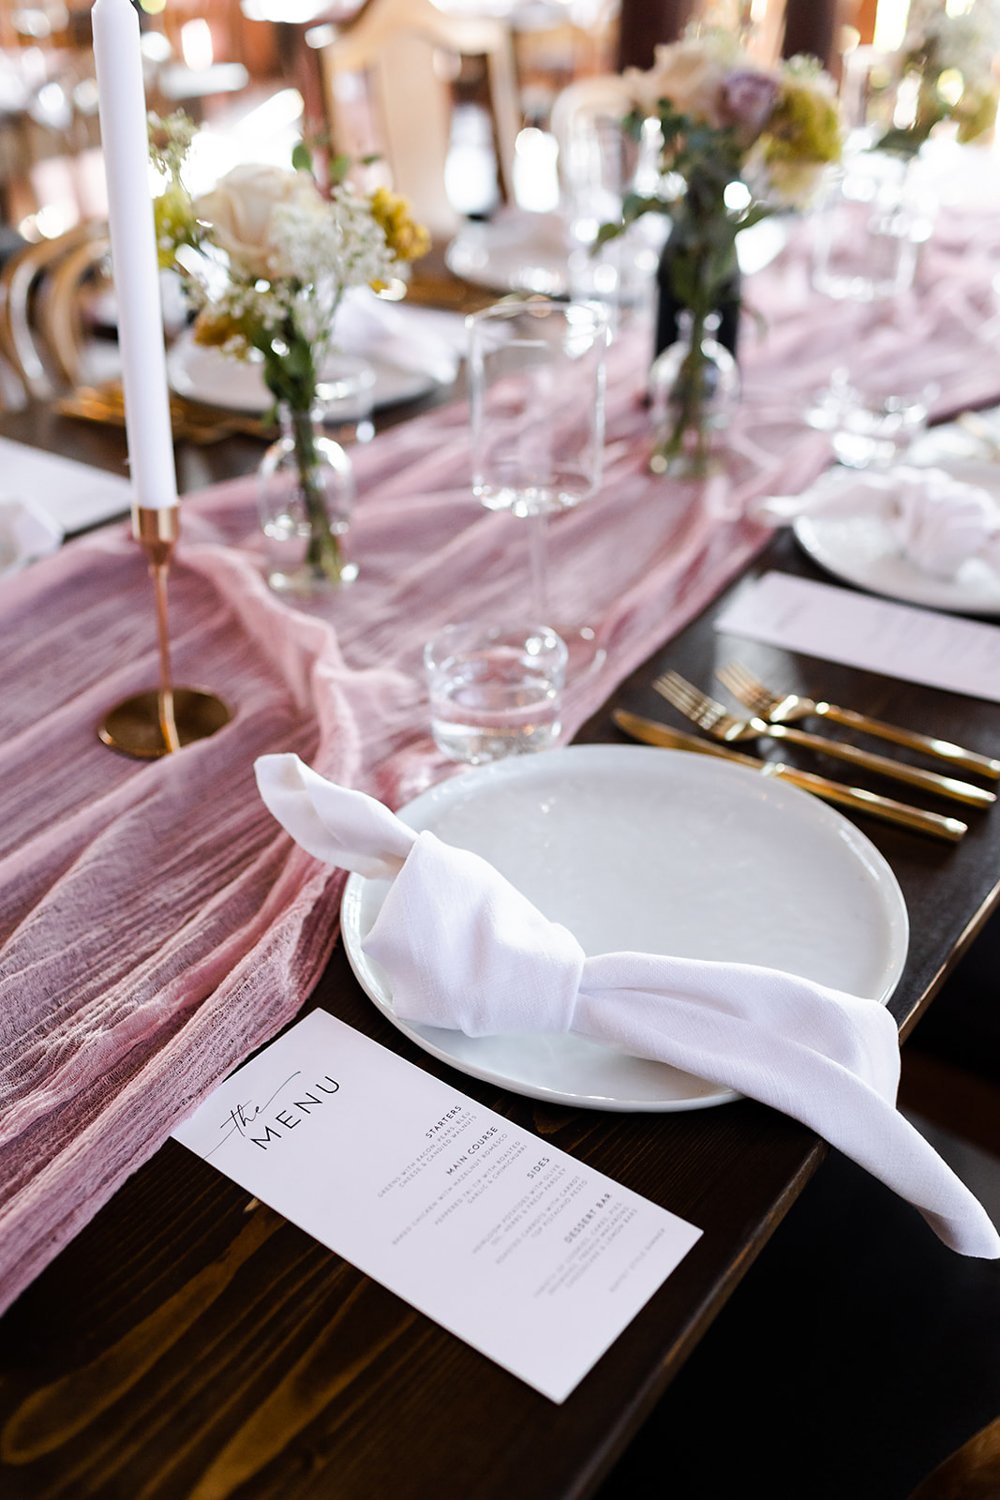 pink and white wedding table settings with gold accents and menu by art de cuisine